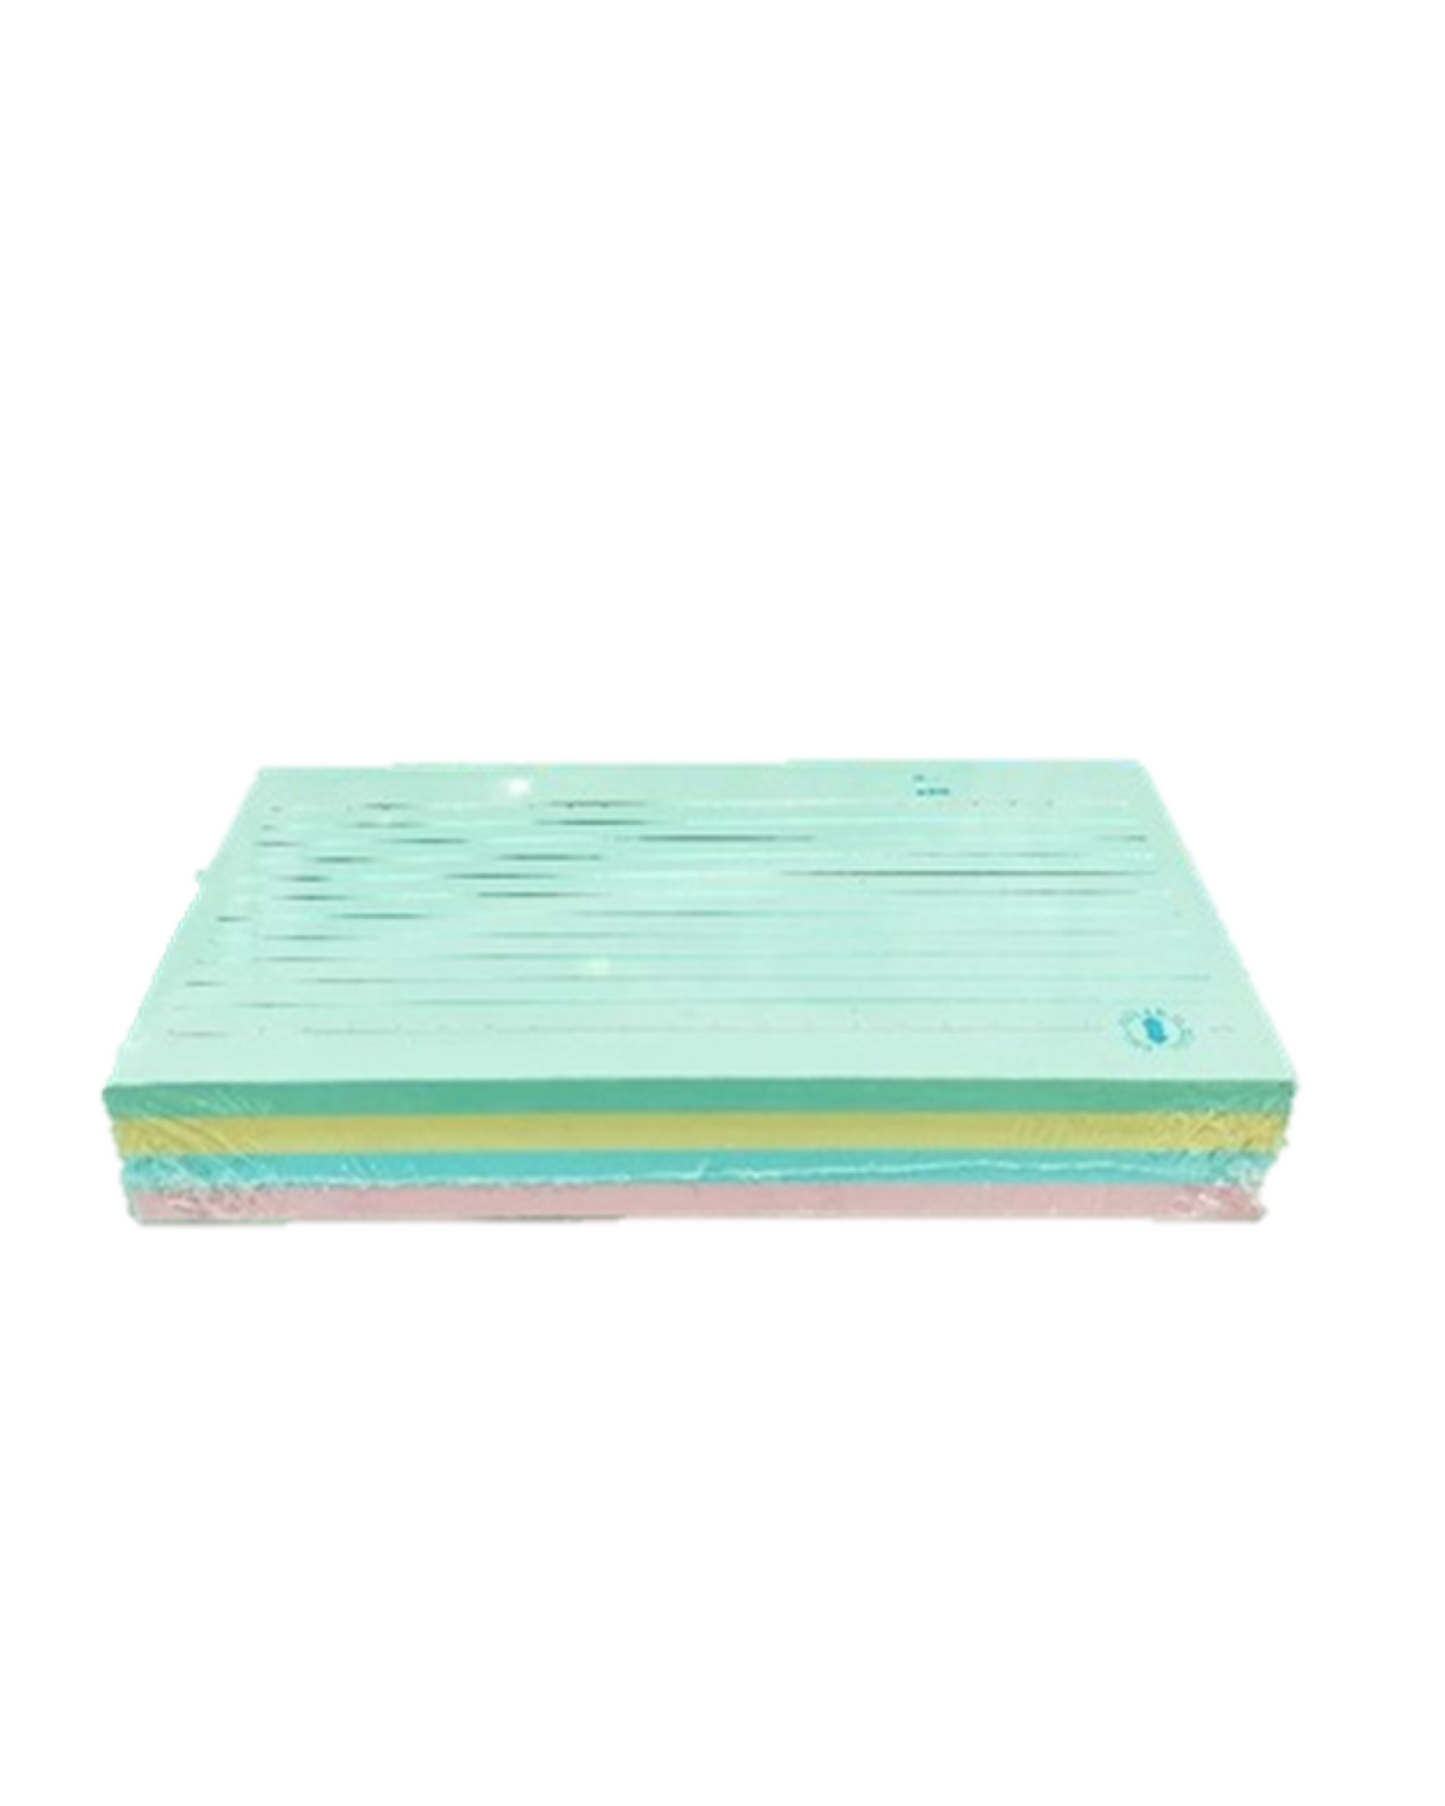 Data Colored Index Card 3x5in | 100pcs